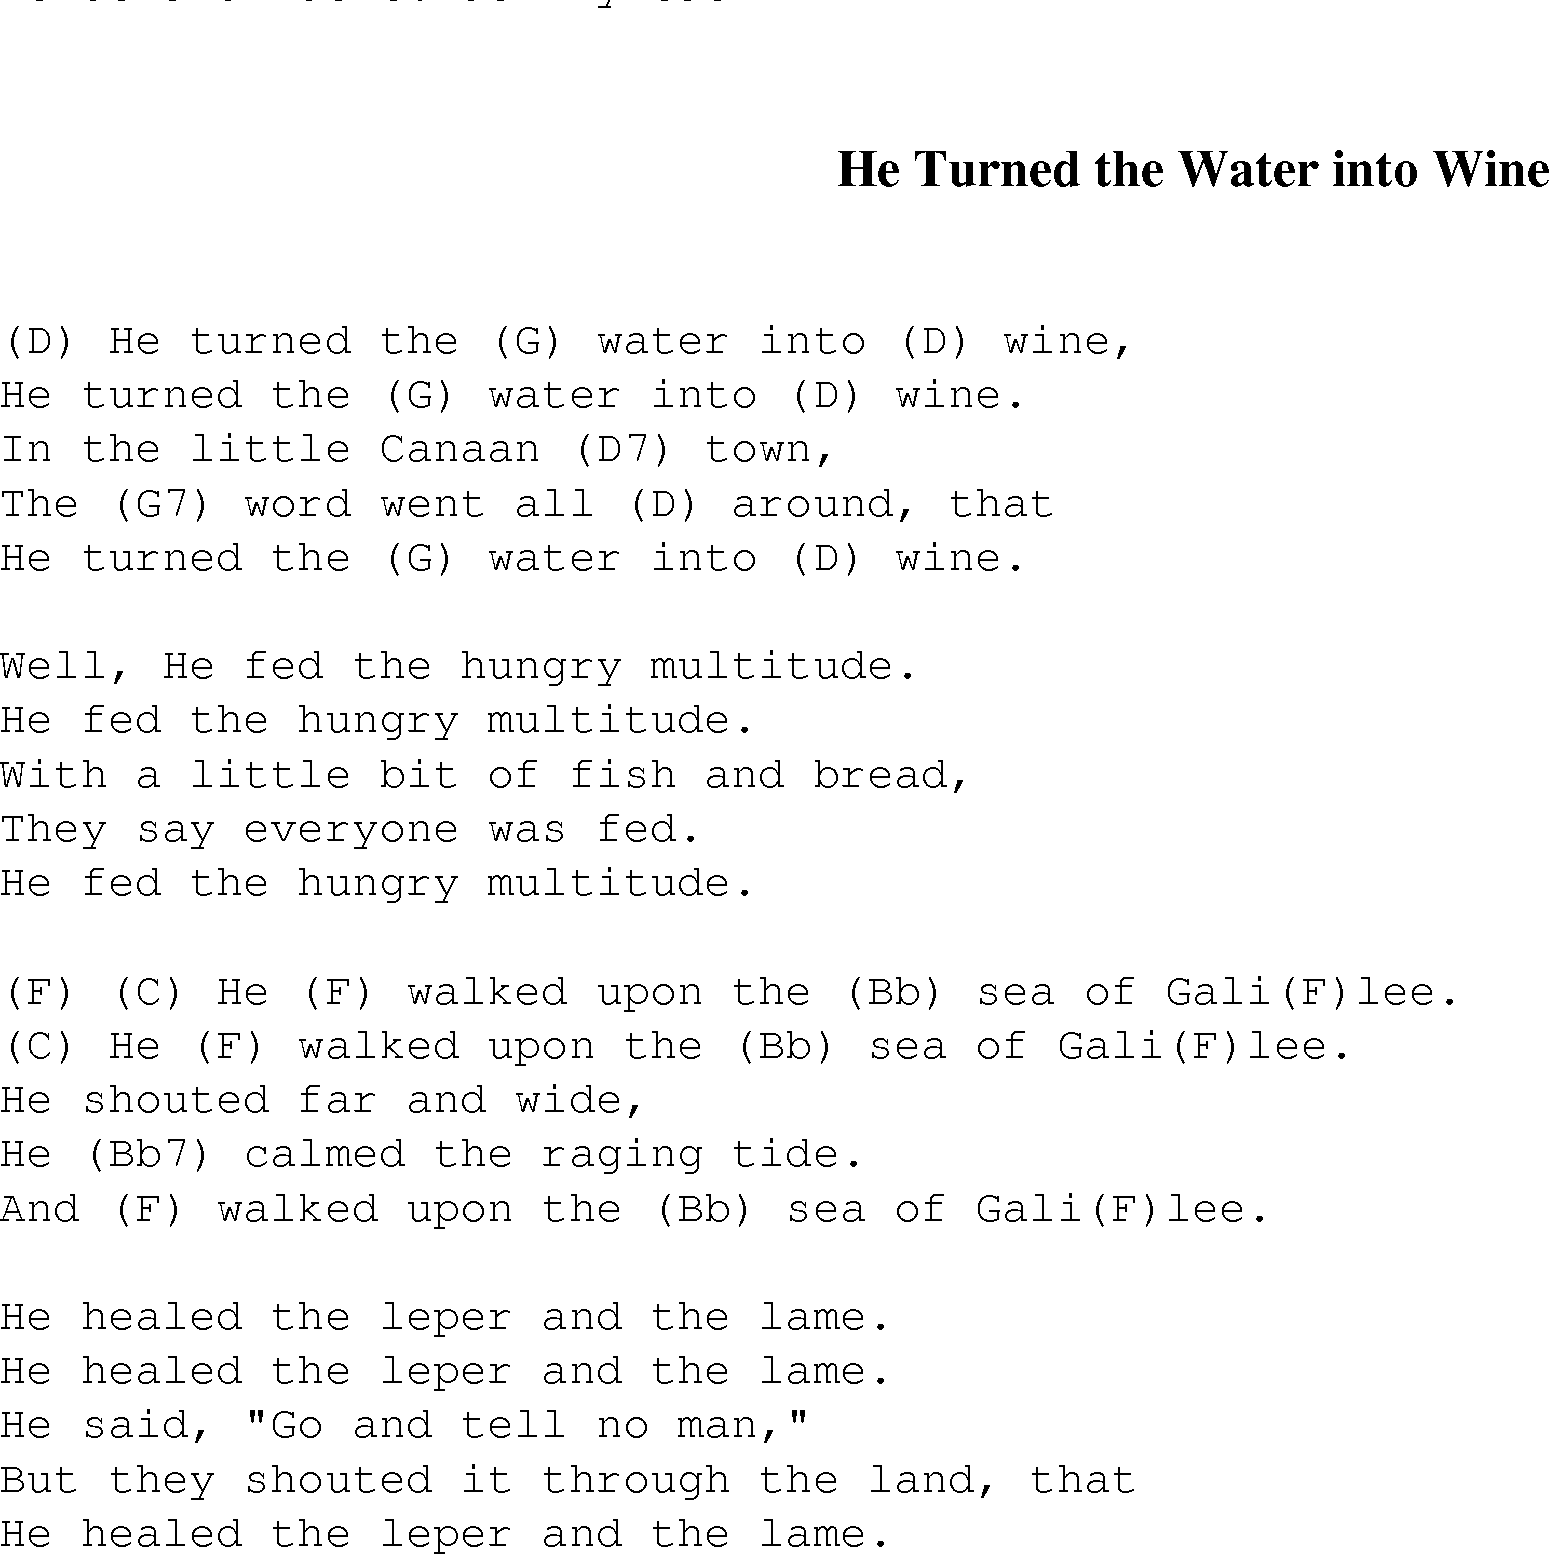 Gospel Song: he_turned_the_water_into_wine, lyrics and chords.